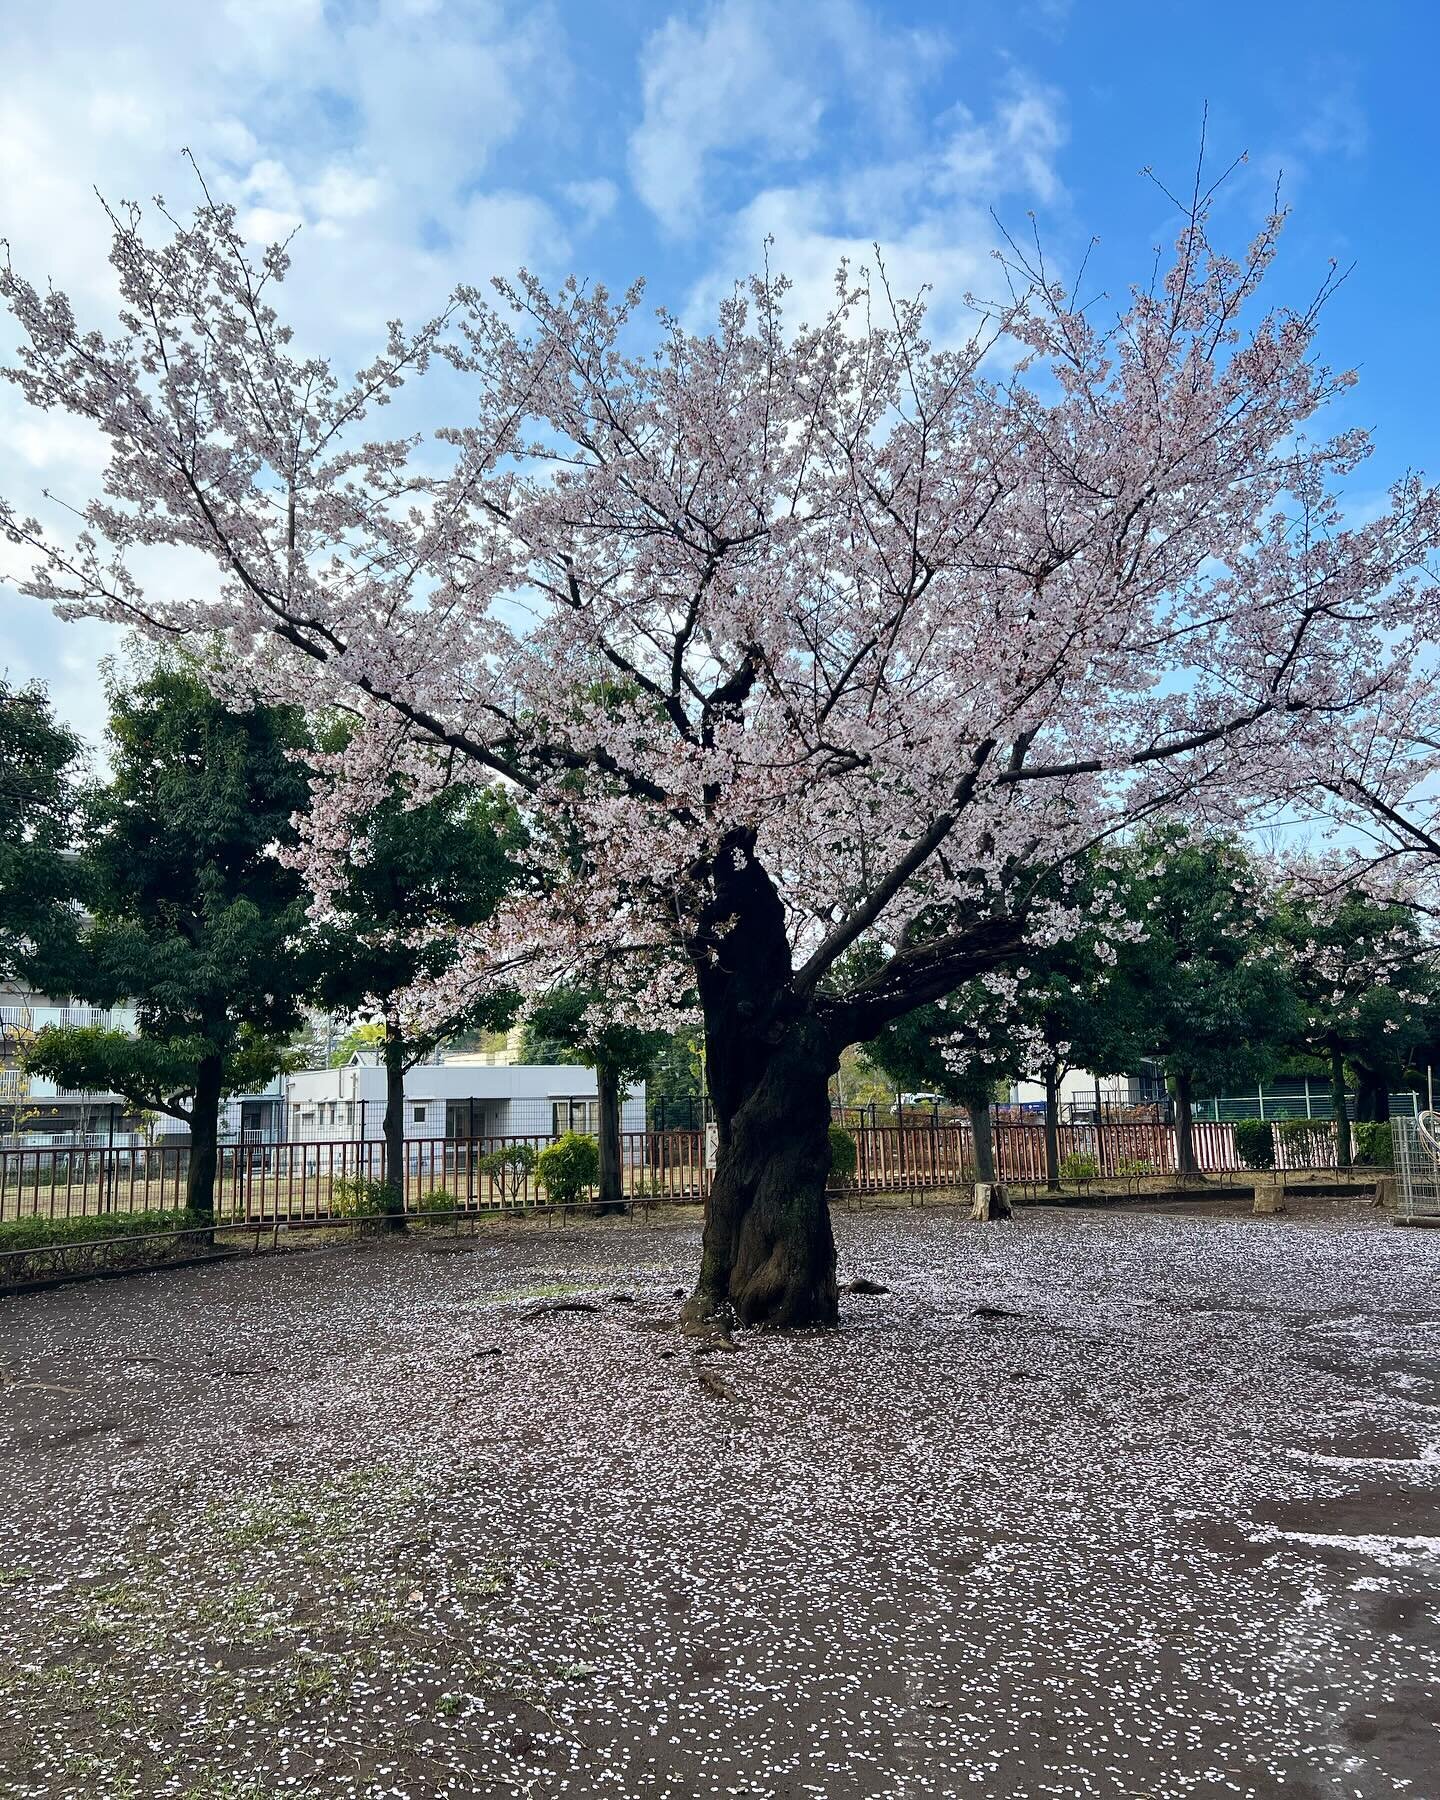 Sakura are blooming later this year in Tokyo.🌸 

Last year, I enjoyed so much cherry blossoms in the area where I lived near Futako-Tamagawa. 🥰

If you want to experience a bit of Tokyo suburban life and sakura at the same time, I recommend the fol